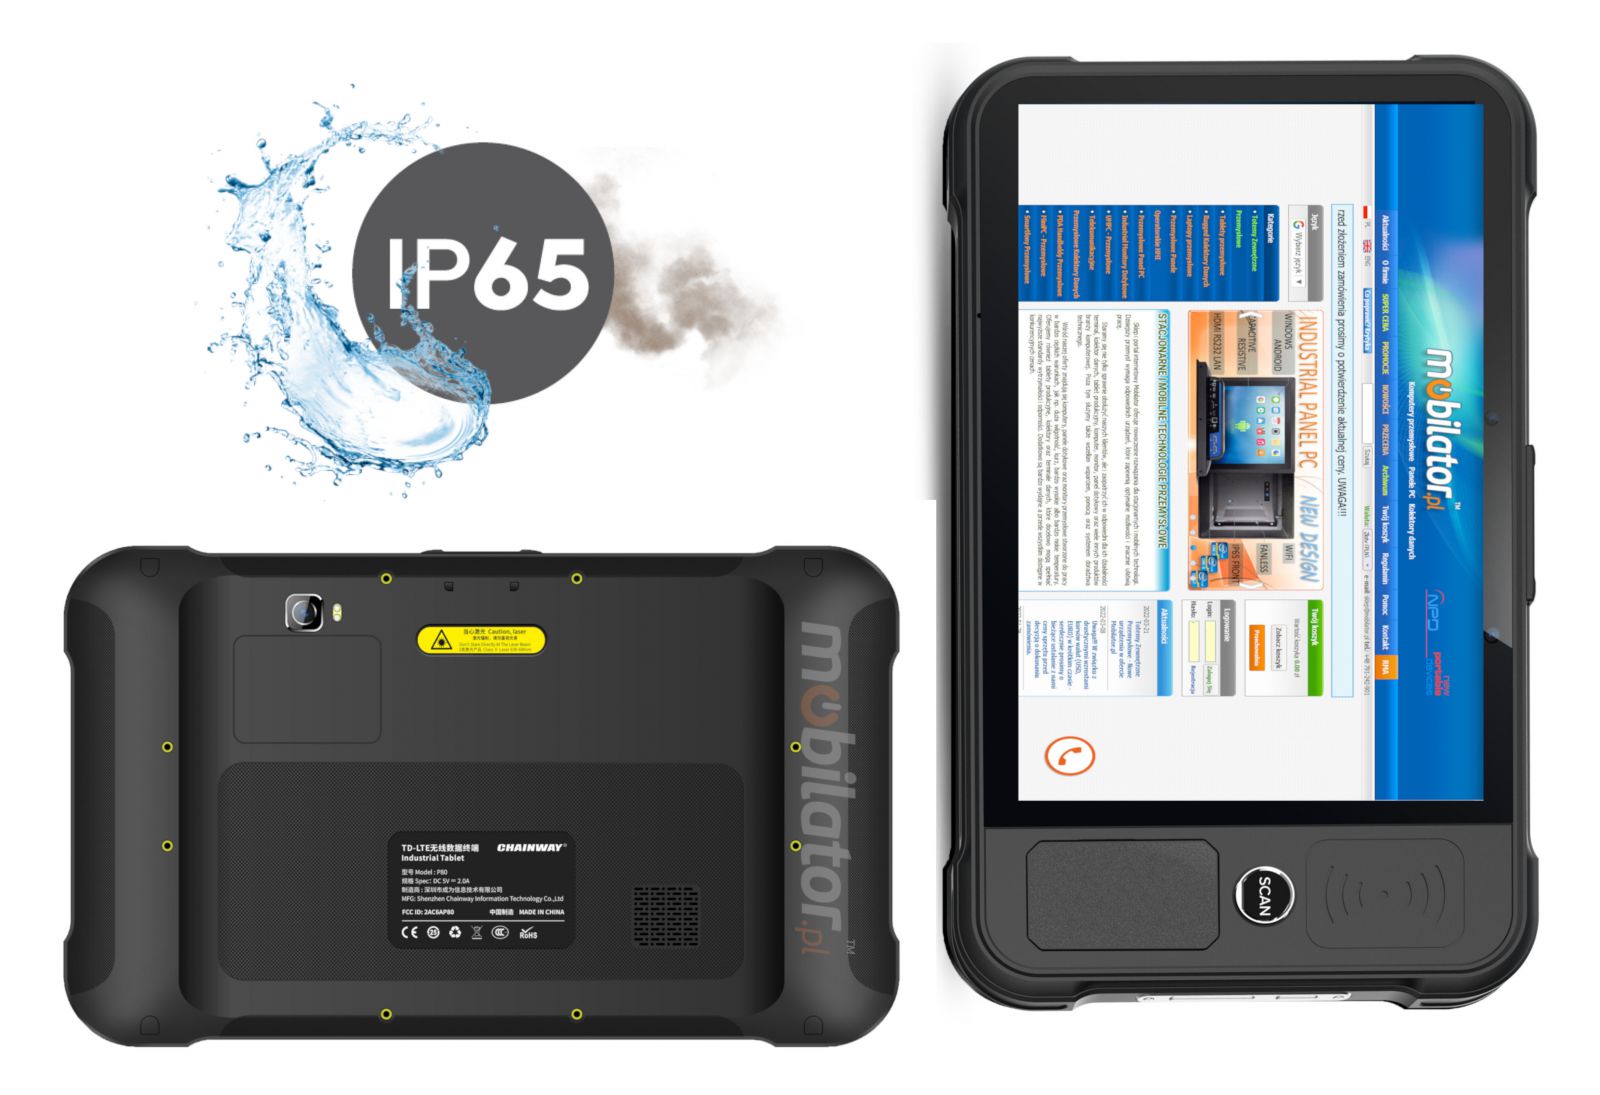 IP65 which tablet has P80-PE